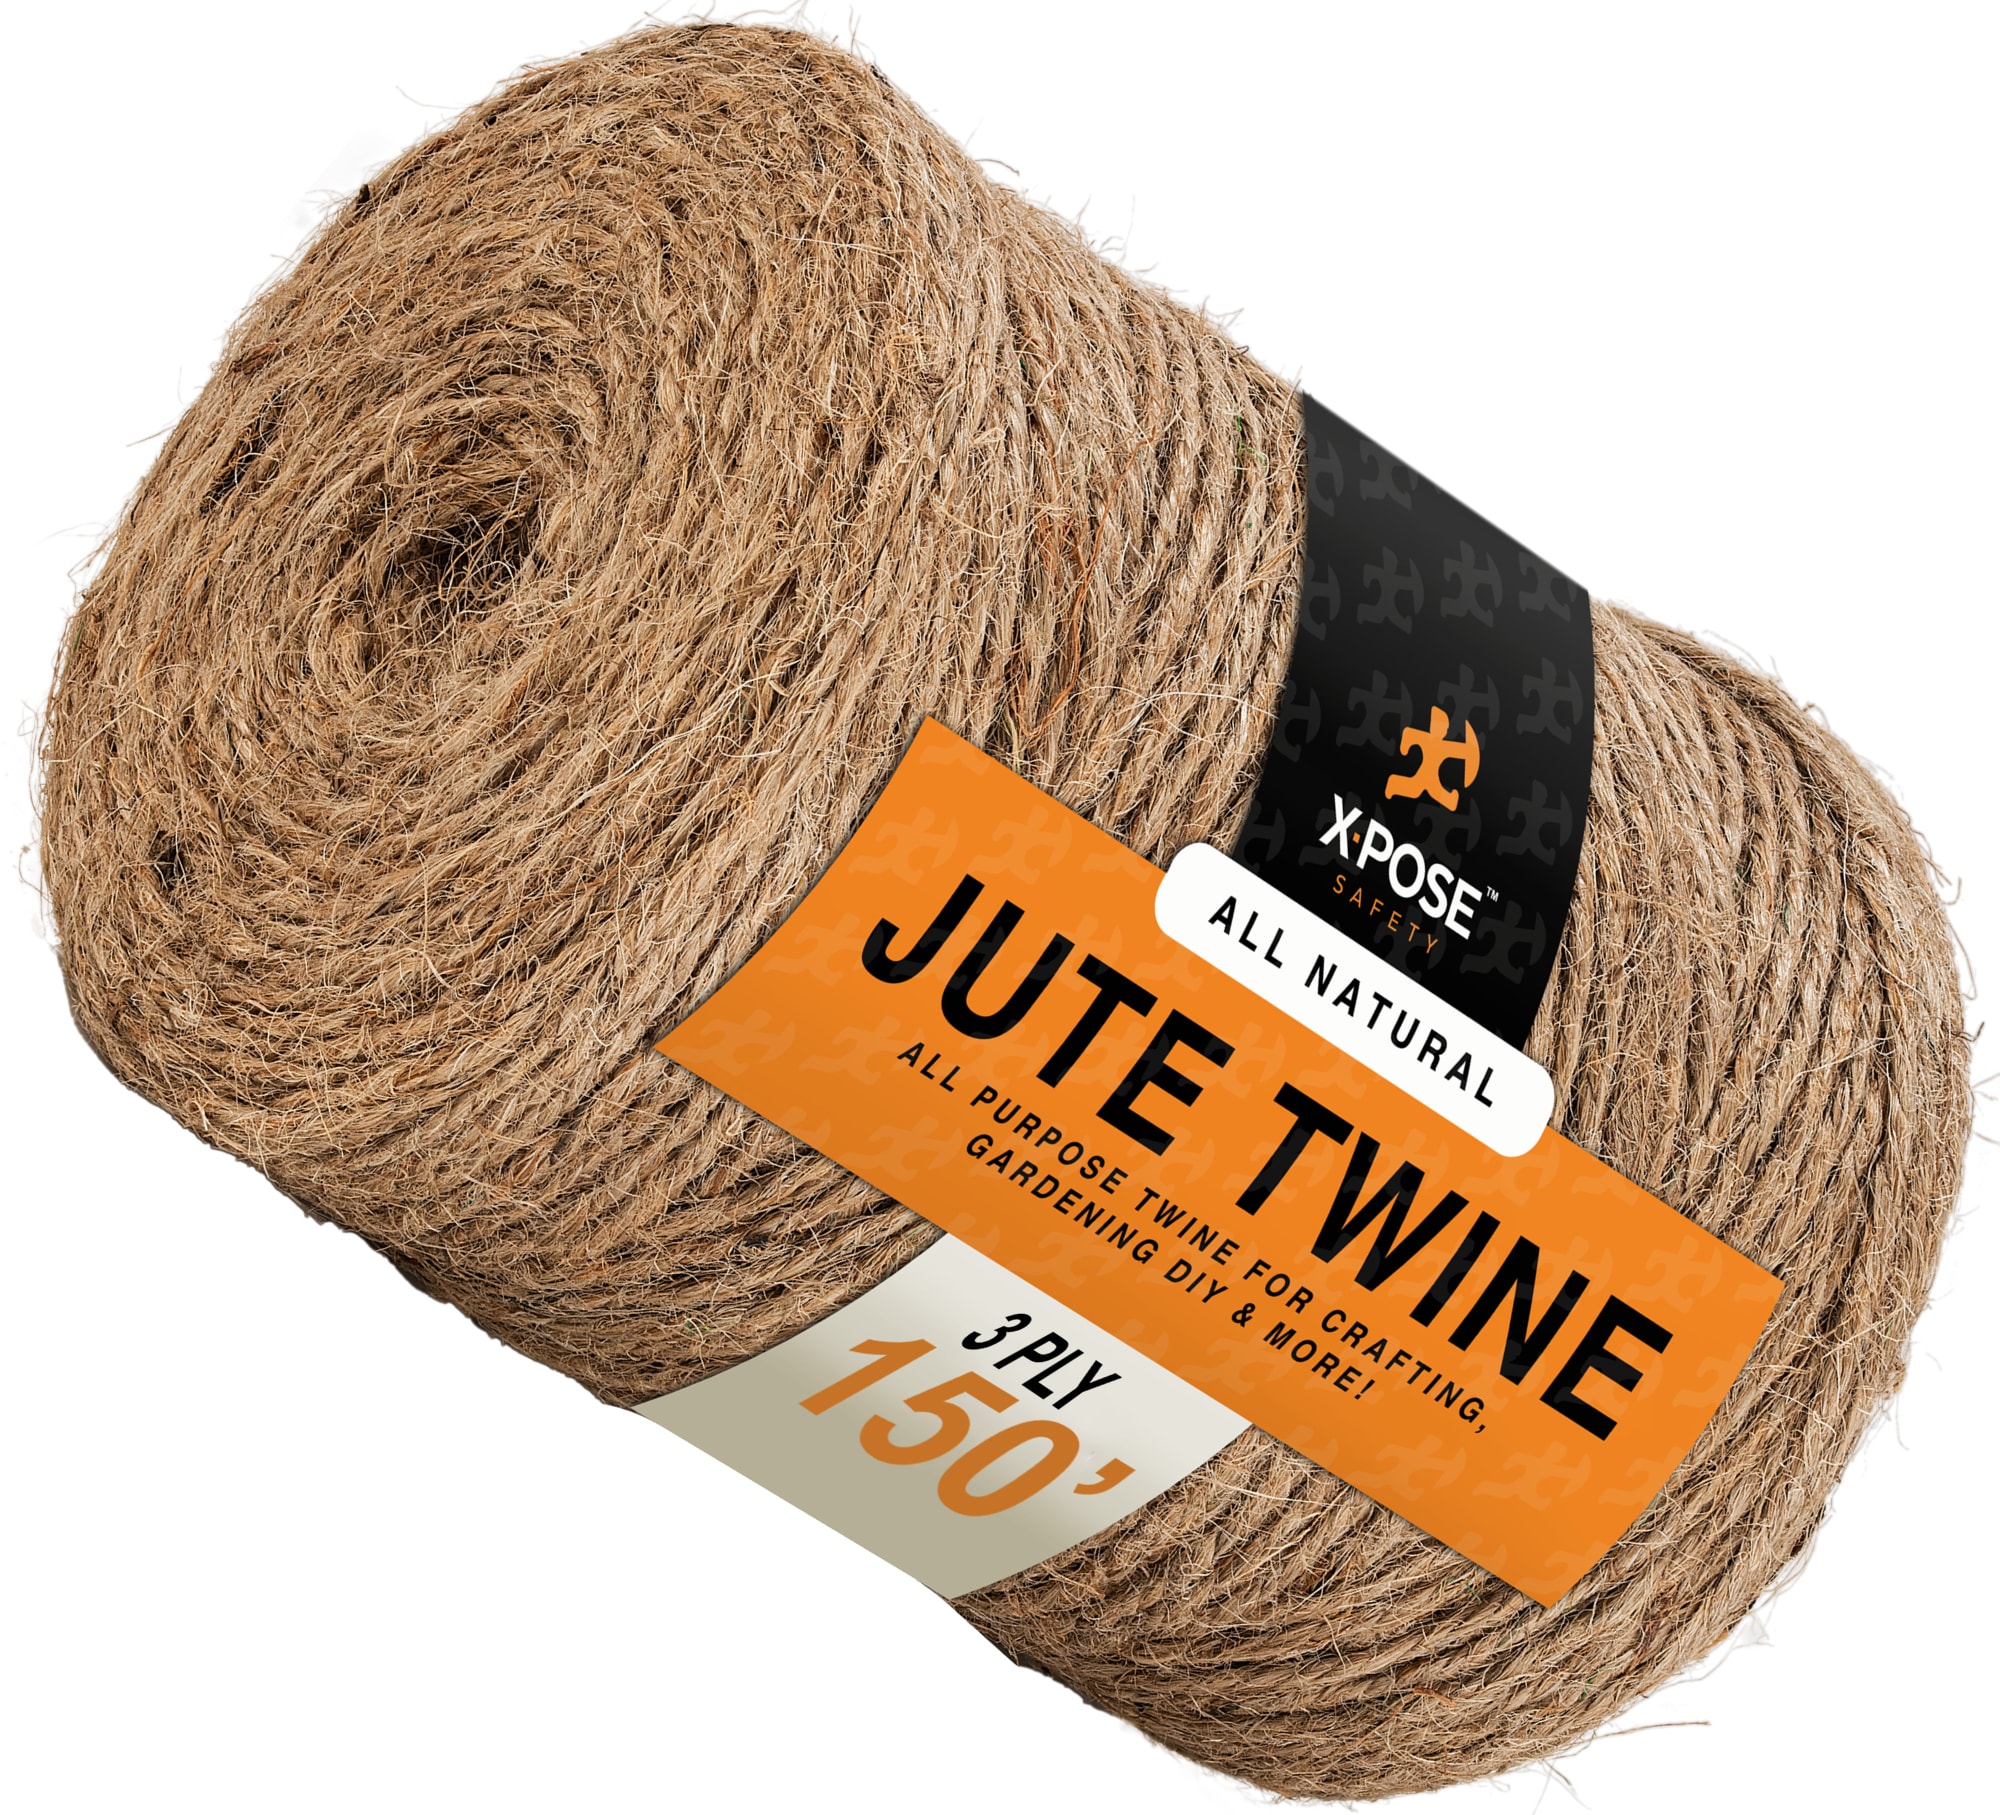 Tenn Well Natural Jute Twine, 656 Feet 2Ply Brown Twine String for,  Nautical Rope For Crafts